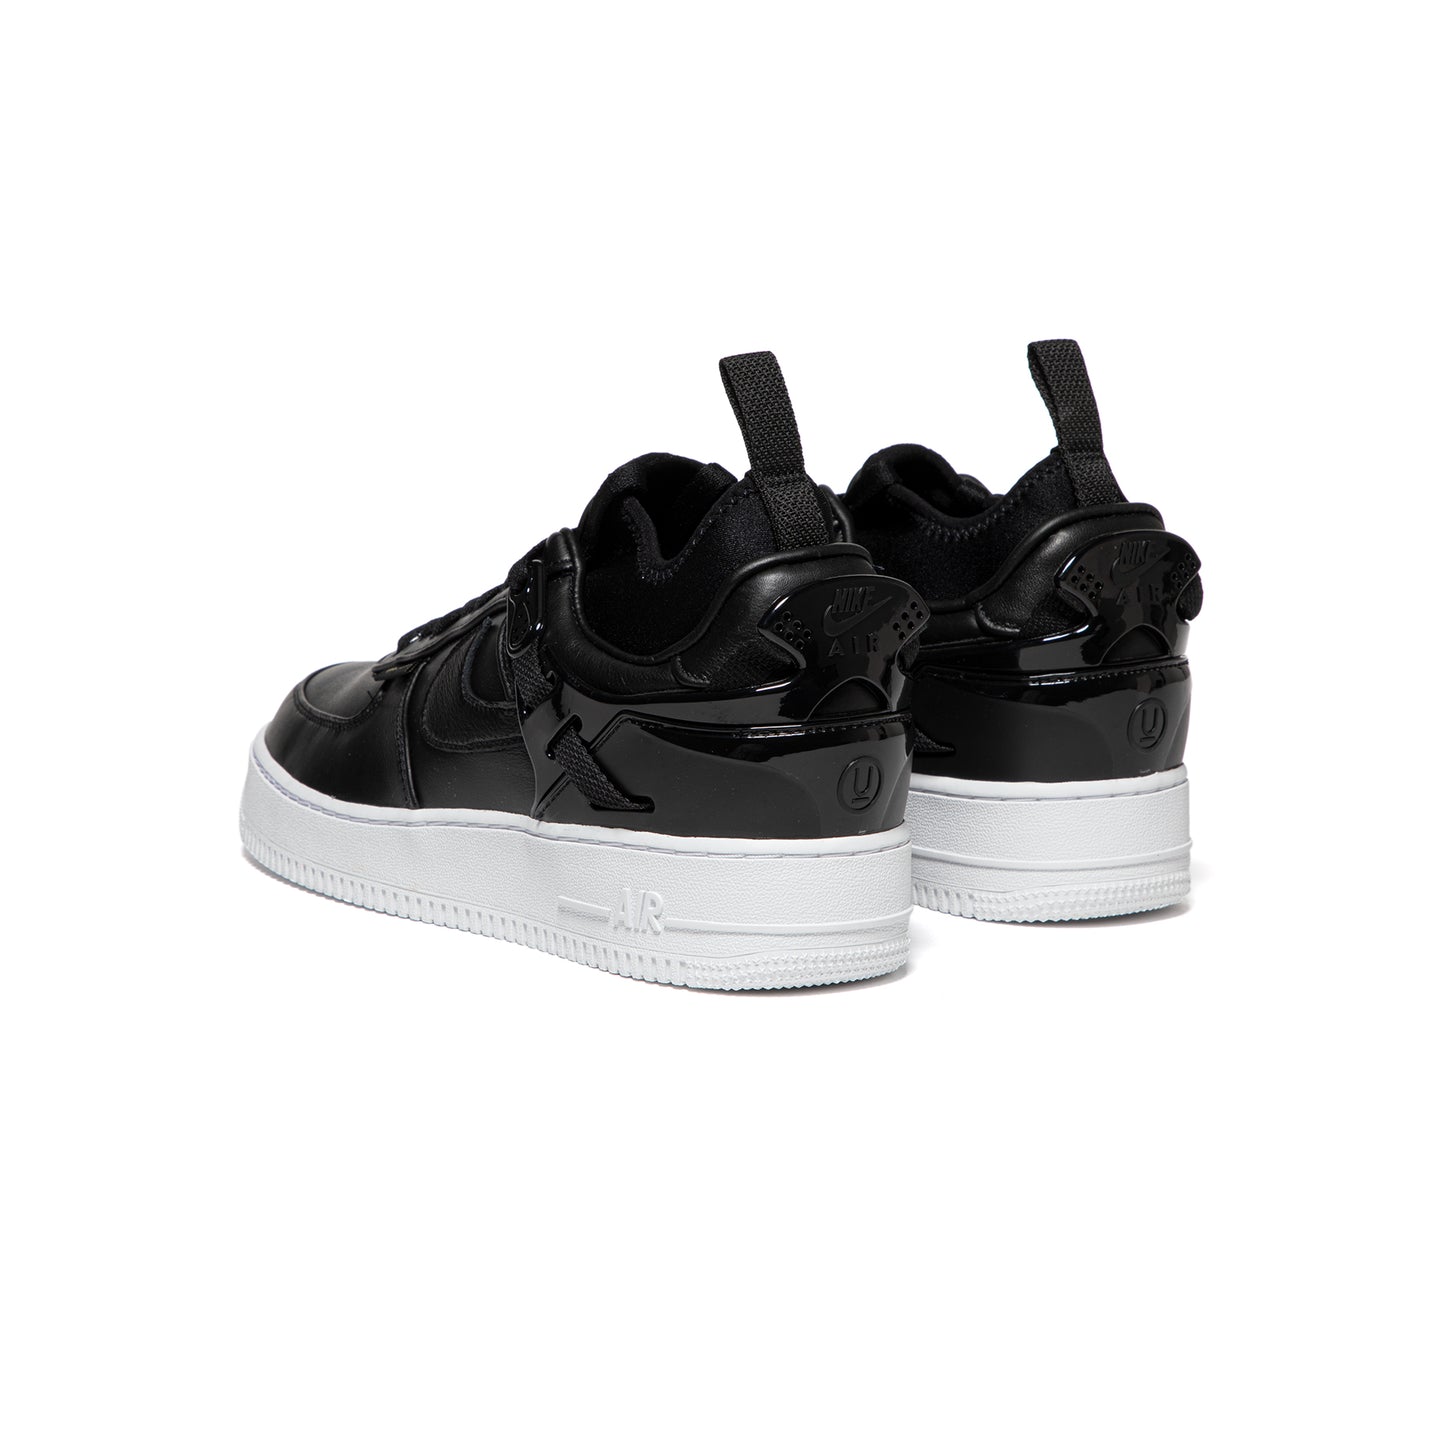 Nike x UNDERCOVER Air Force 1 Low SP (Black/White)